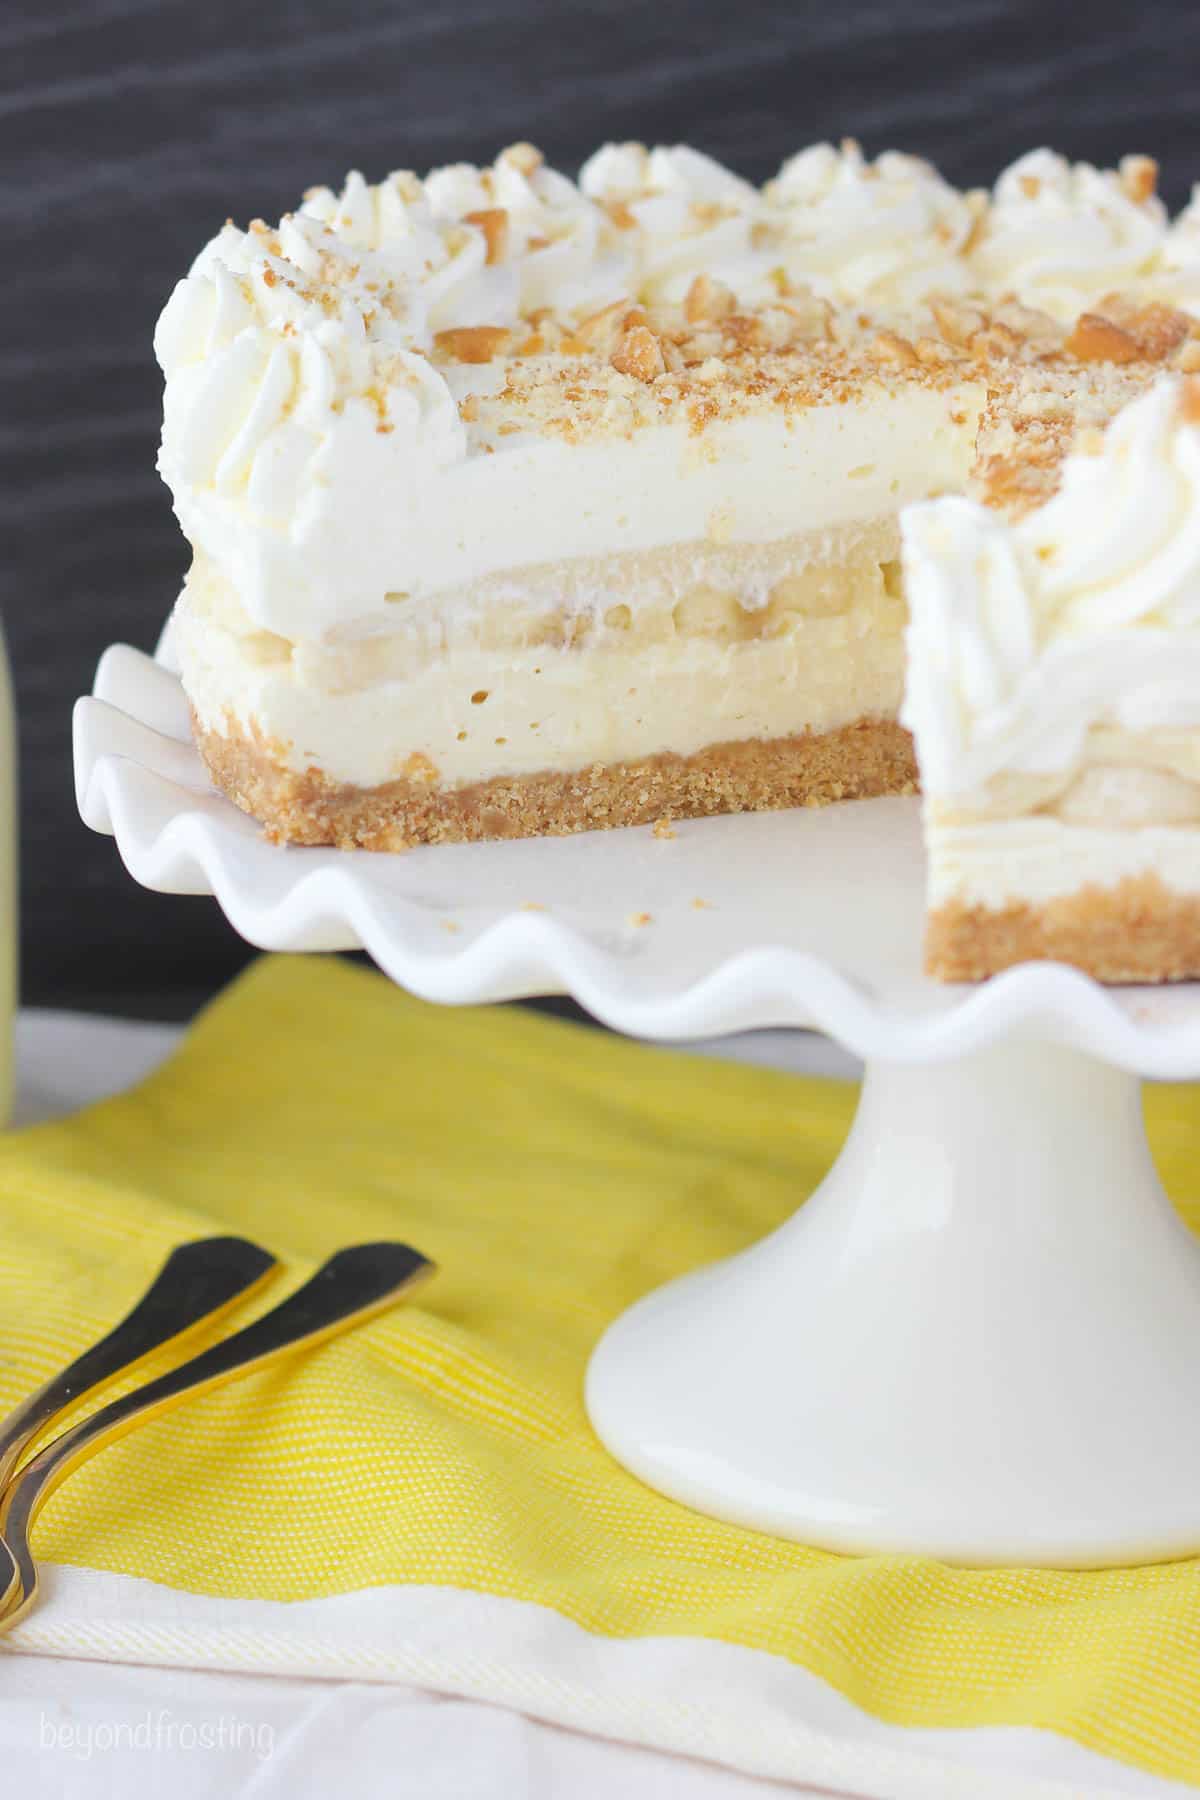 A banana layer cake on a tall cake stand with a yellow dishtowel underneath it